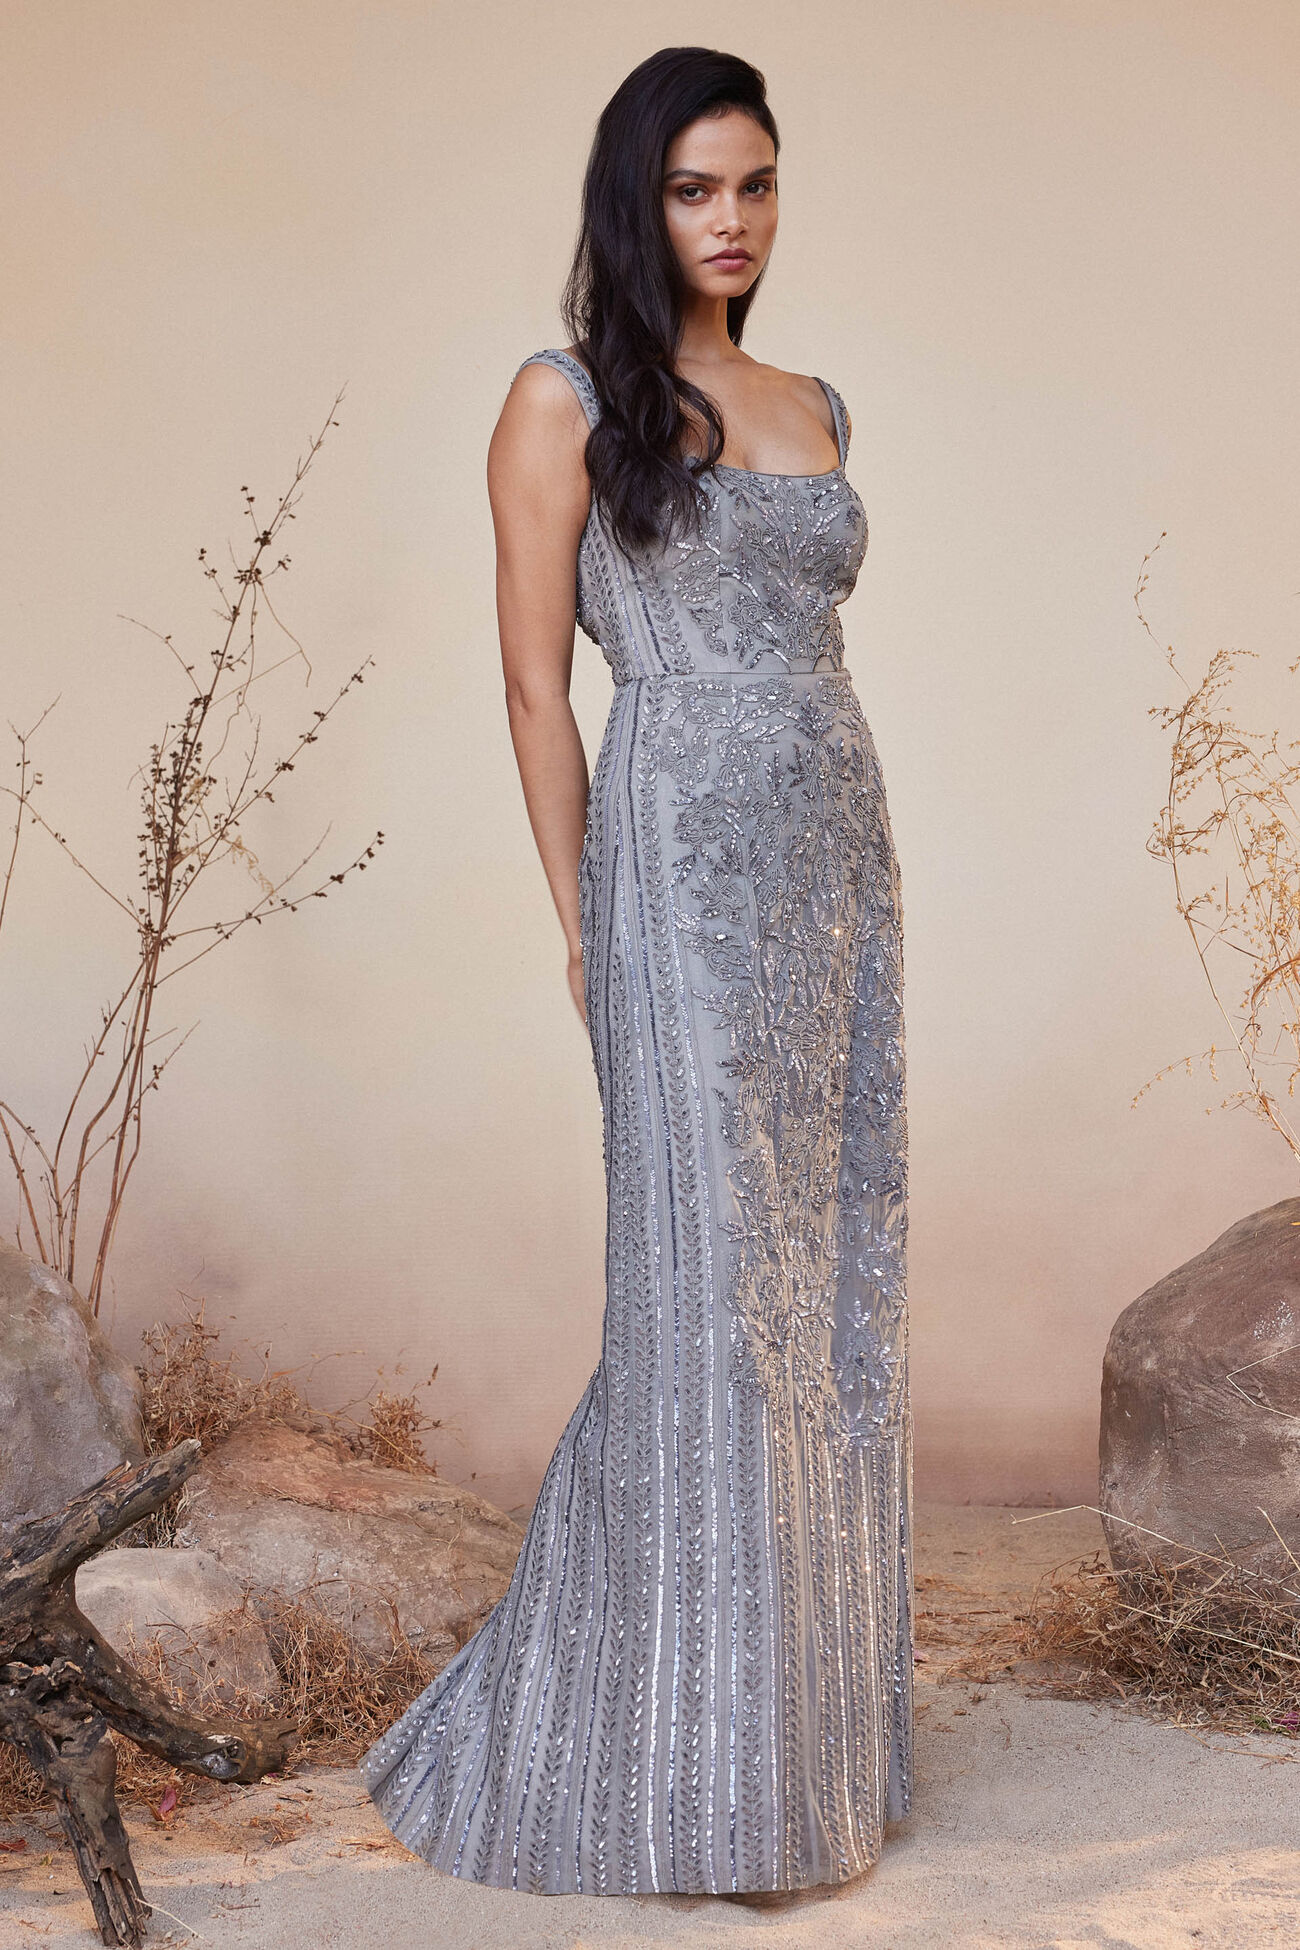 Stardust Embroidered Cord Gown - Grey, Grey, image 3